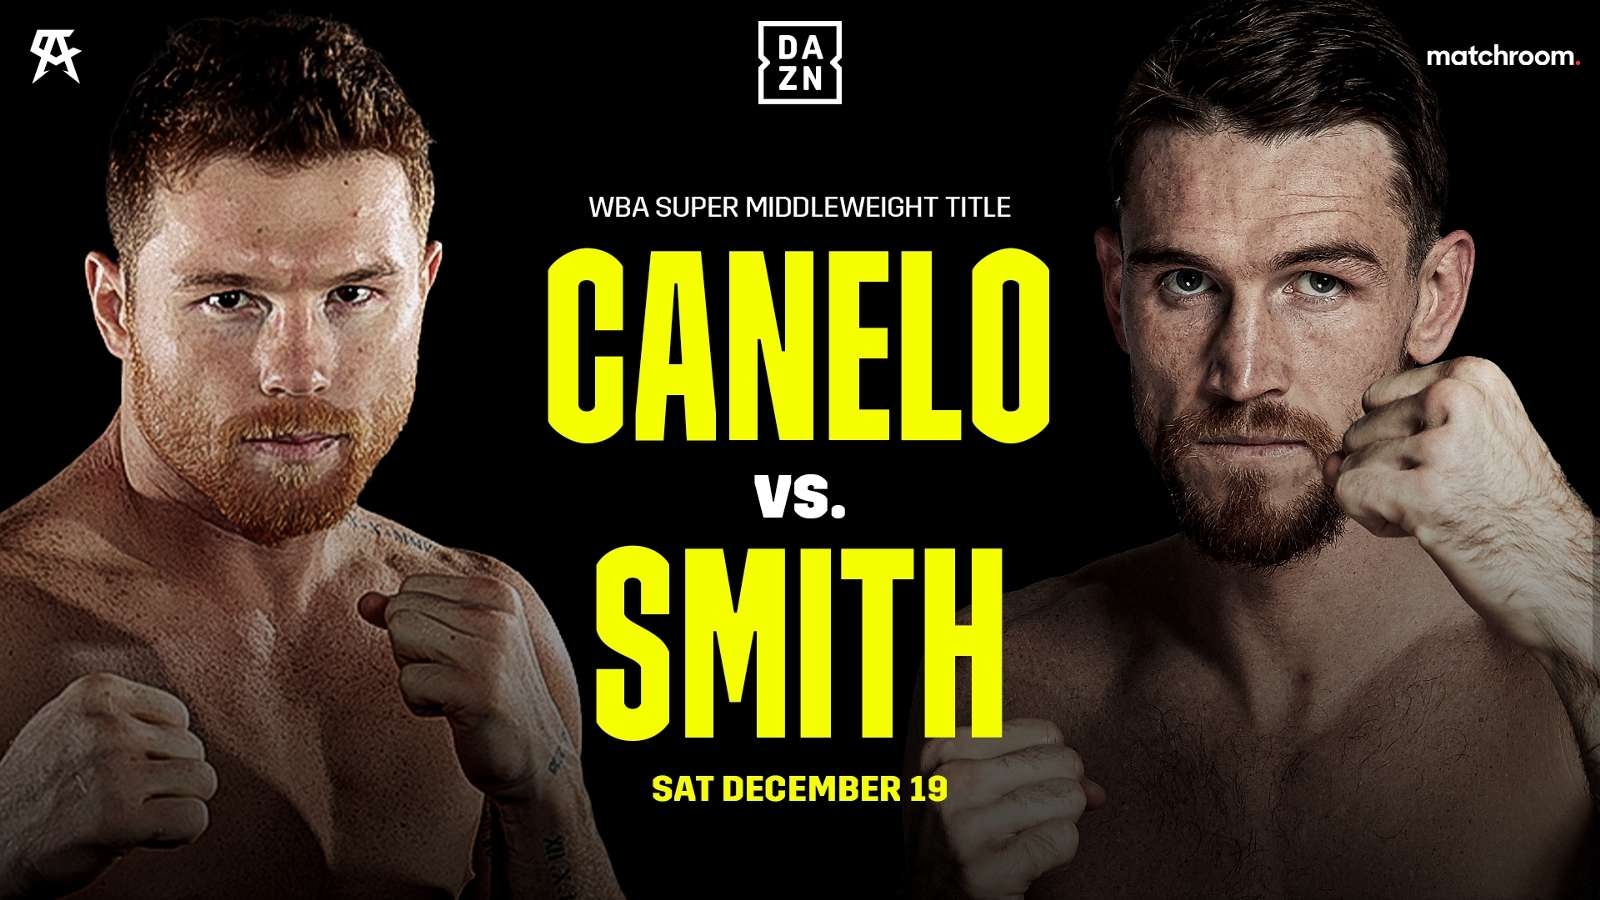 Callum Smith vs Canelo Alvarez fight info, fighter stats, date, undercard and how to watch Boxing Focus